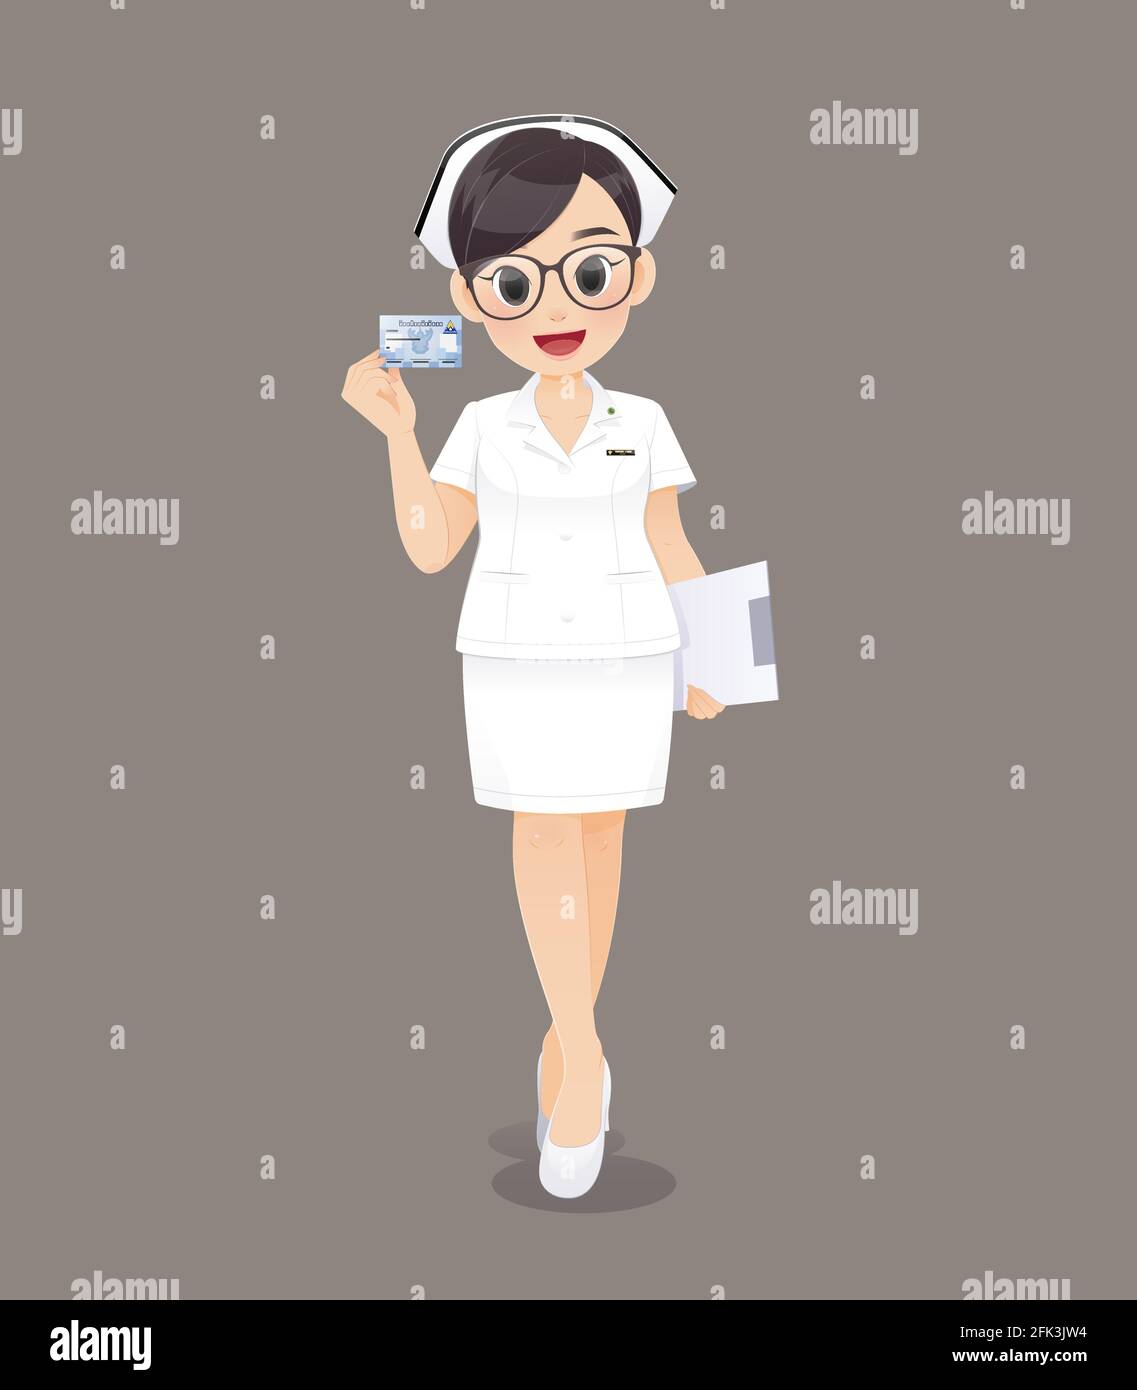 Cartoon woman doctor or nurse wearing brown glasses in white uniform holding Health insurance card on brown background, Smiling female nursing staff, Stock Vector